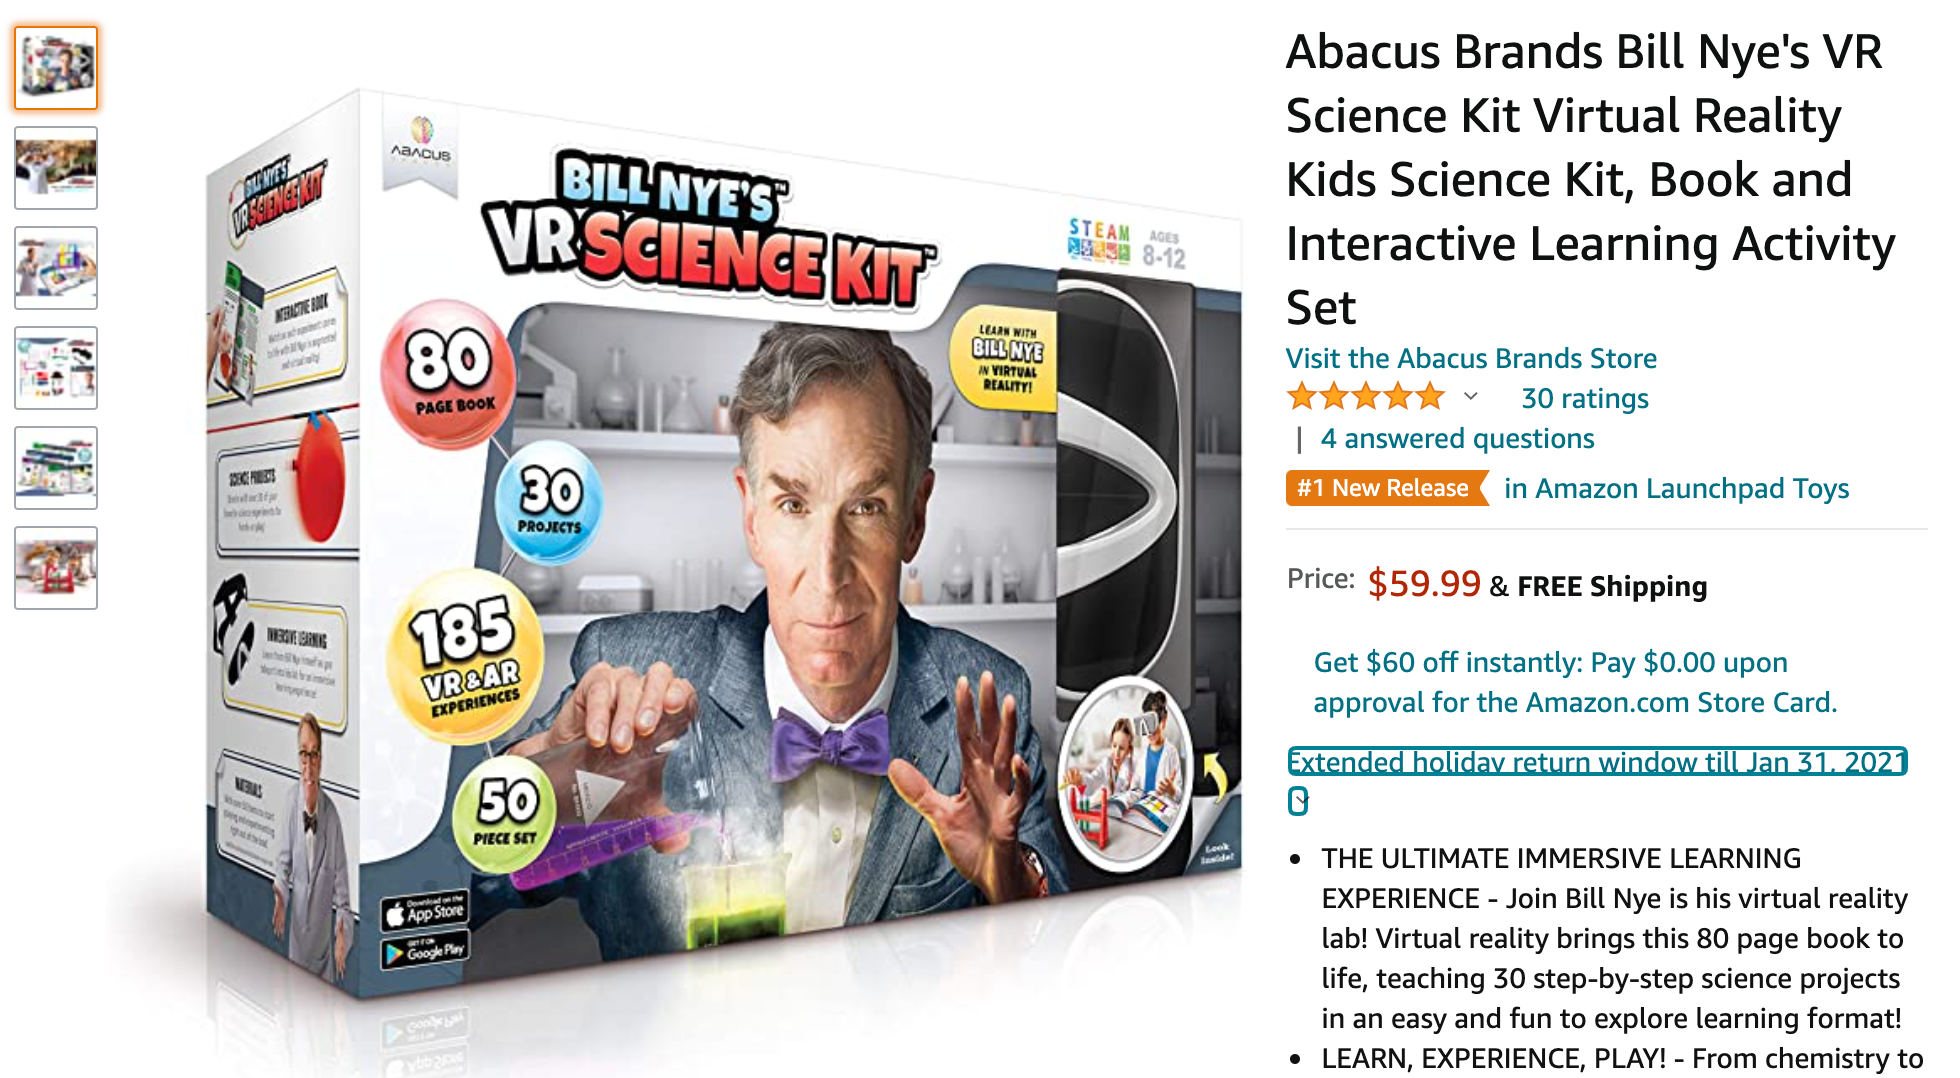 Abacus Brands Bill Nye's VR Science Kit Virtual Reality Kids Science Kit, Book and Interactive Learning Activity Set.jpg